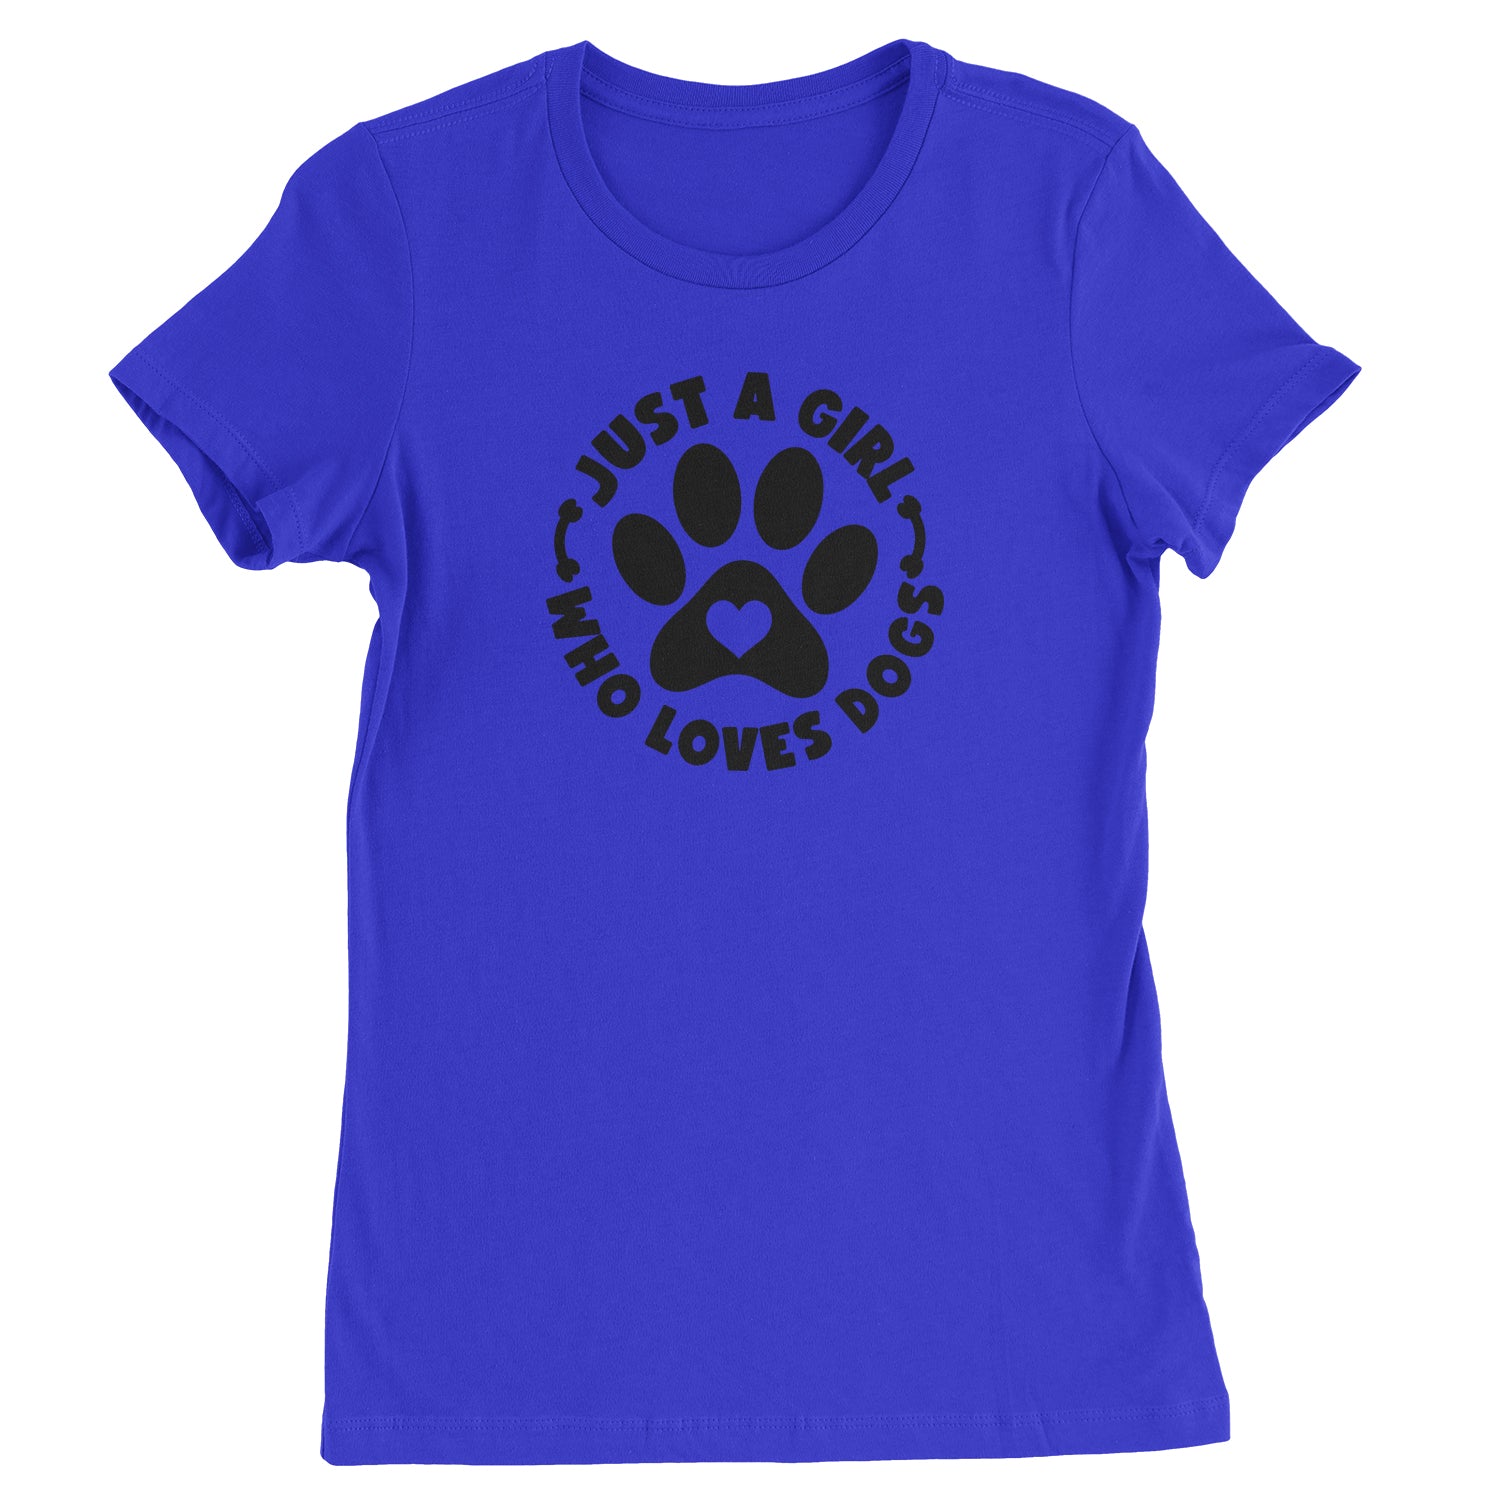 Dogs Just A Girl Who Loves DOGS Womens T-shirt dog, puppy, rescue by Expression Tees